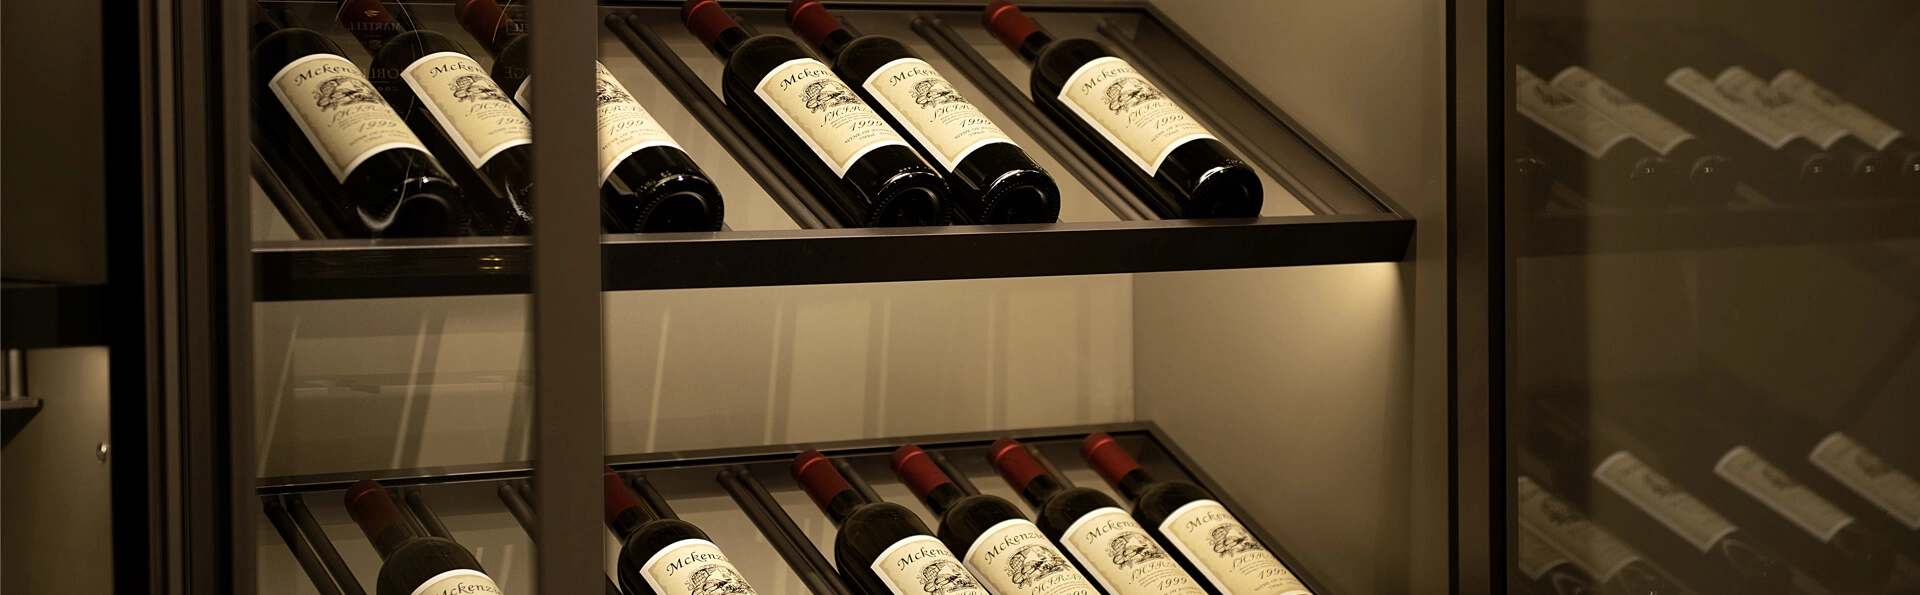 Advantages of Stainless Steel Wine Cabinet